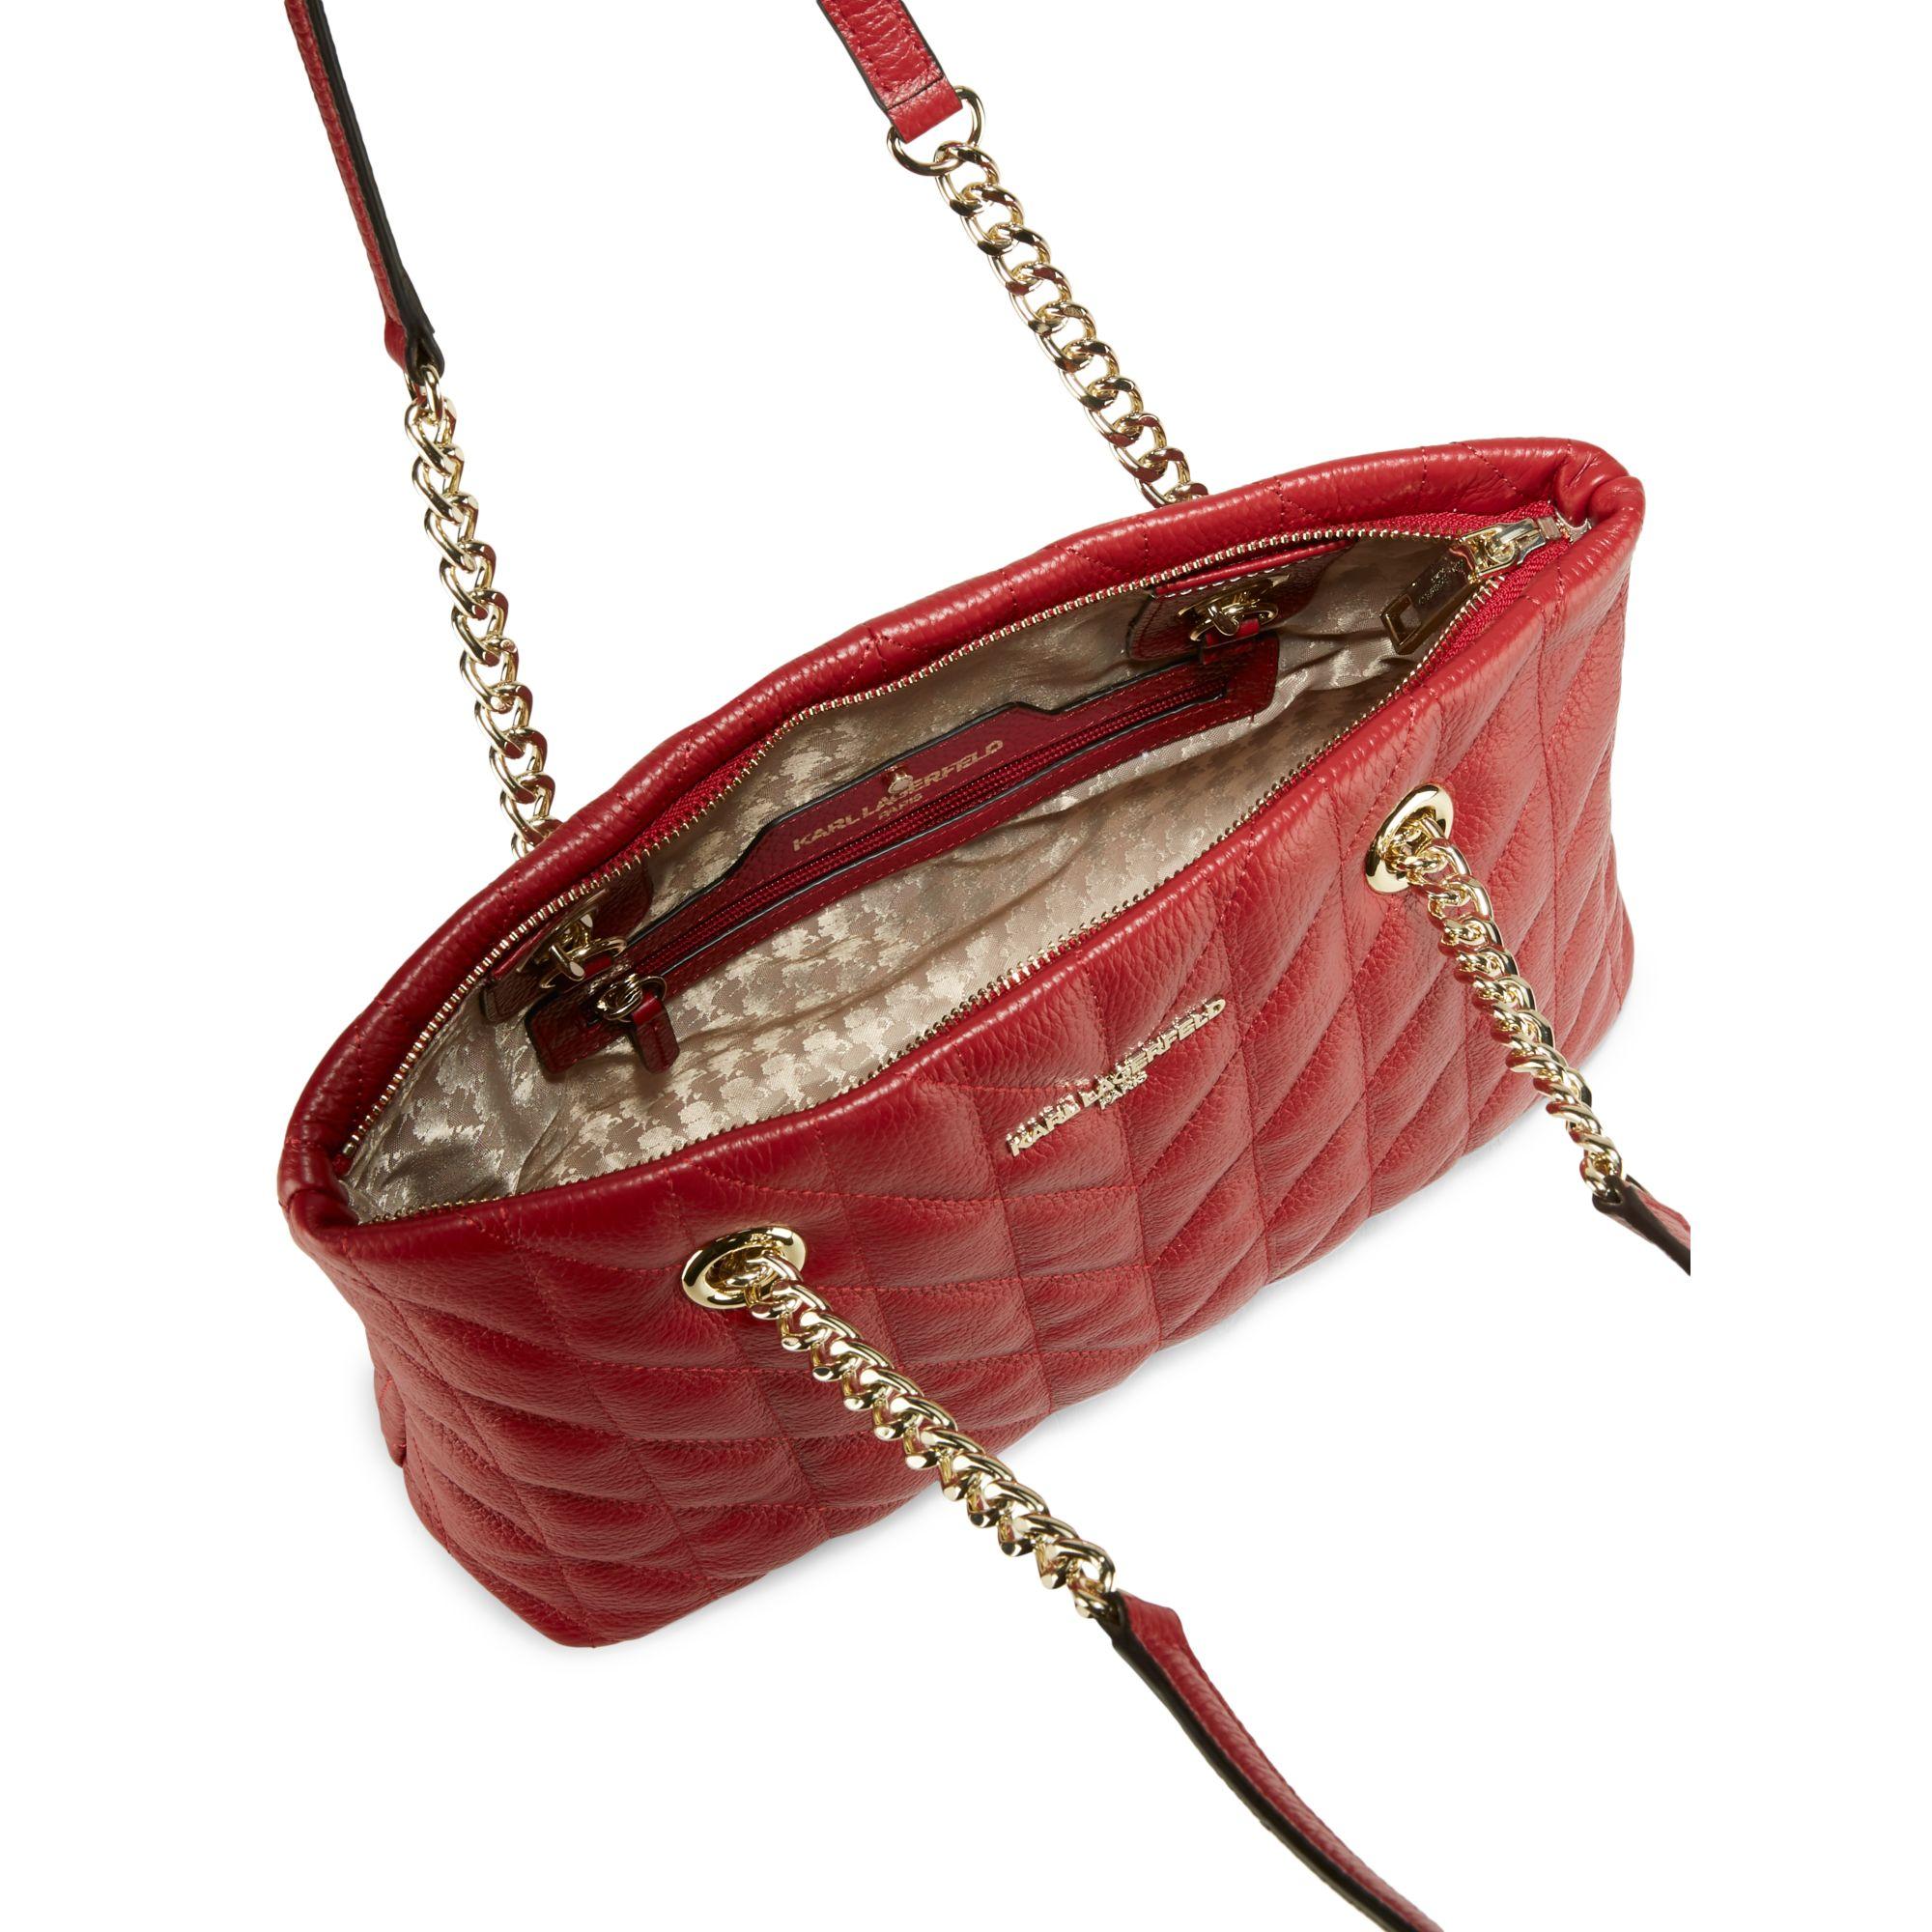 Karl Lagerfeld Karolina Quilted Leather Chain Shoulder Bag in Red